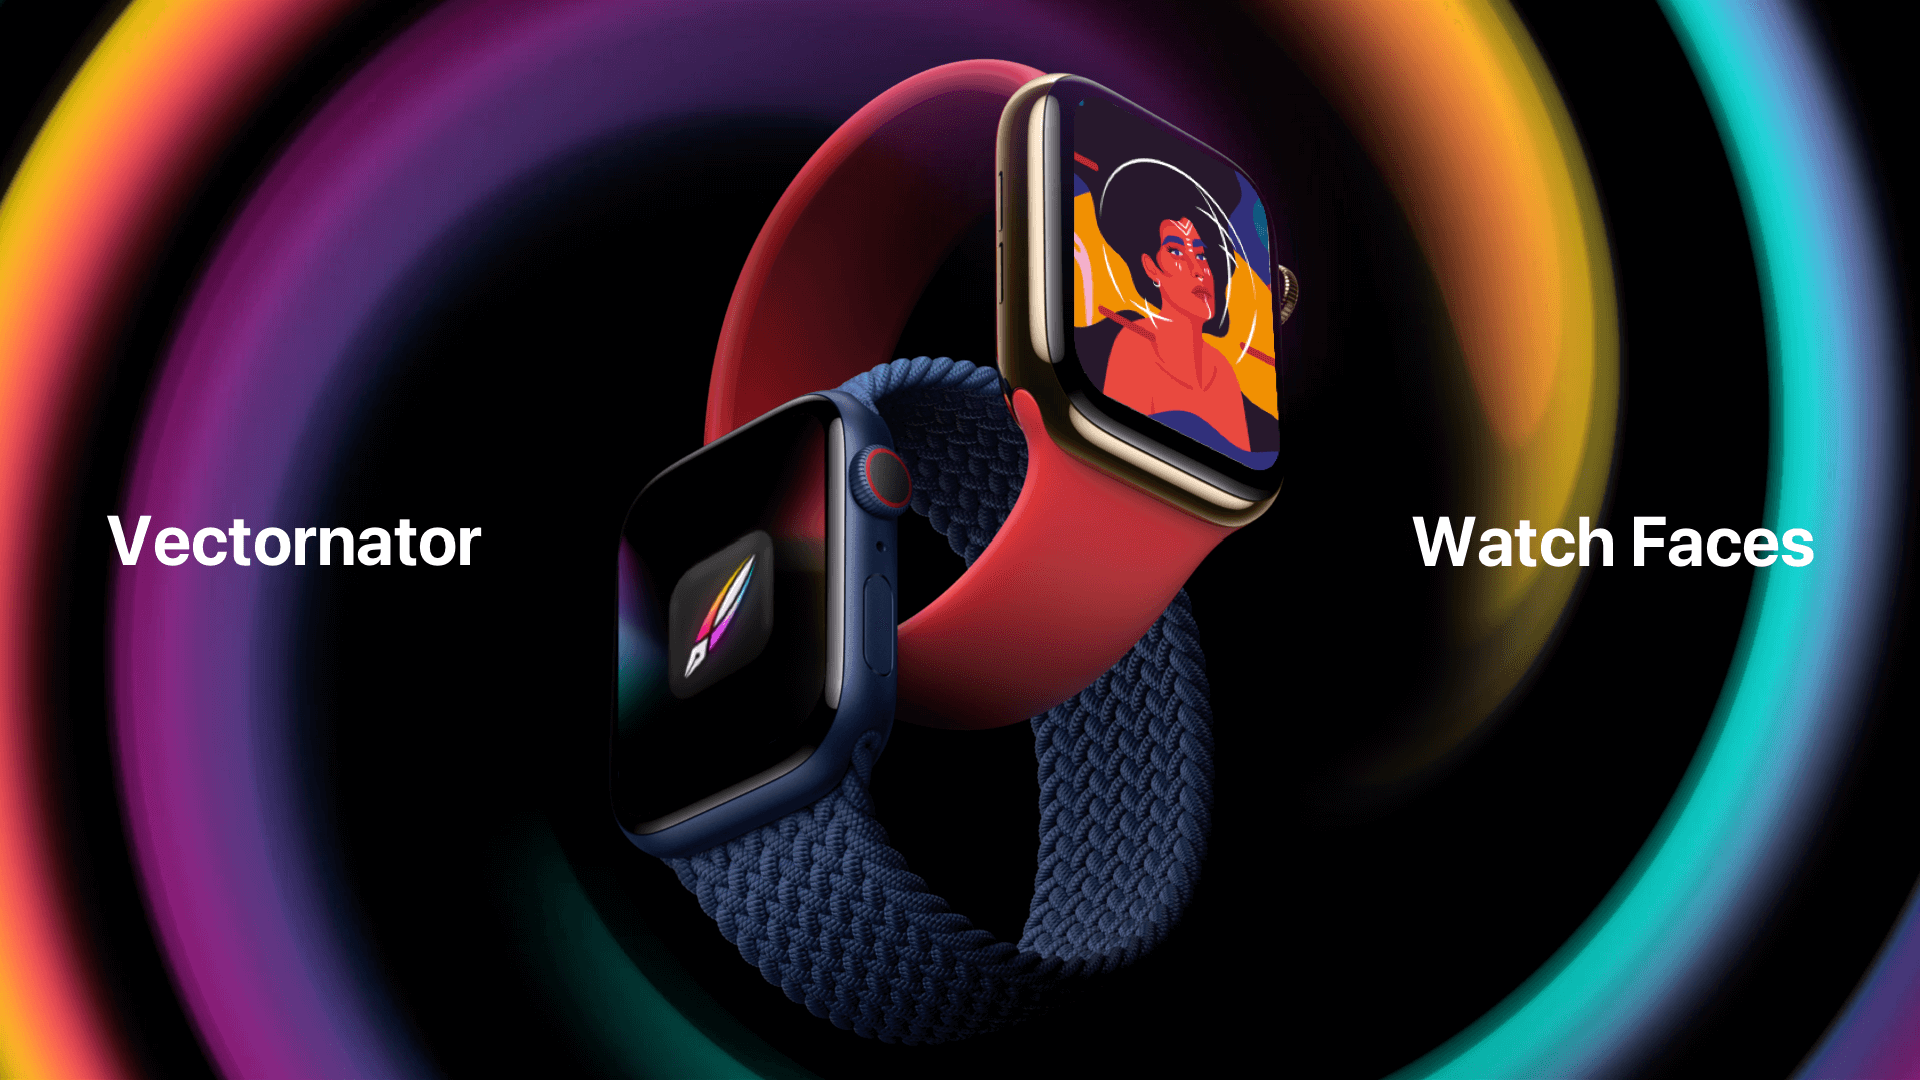 Introducing Vectornator Faces on Apple Watch